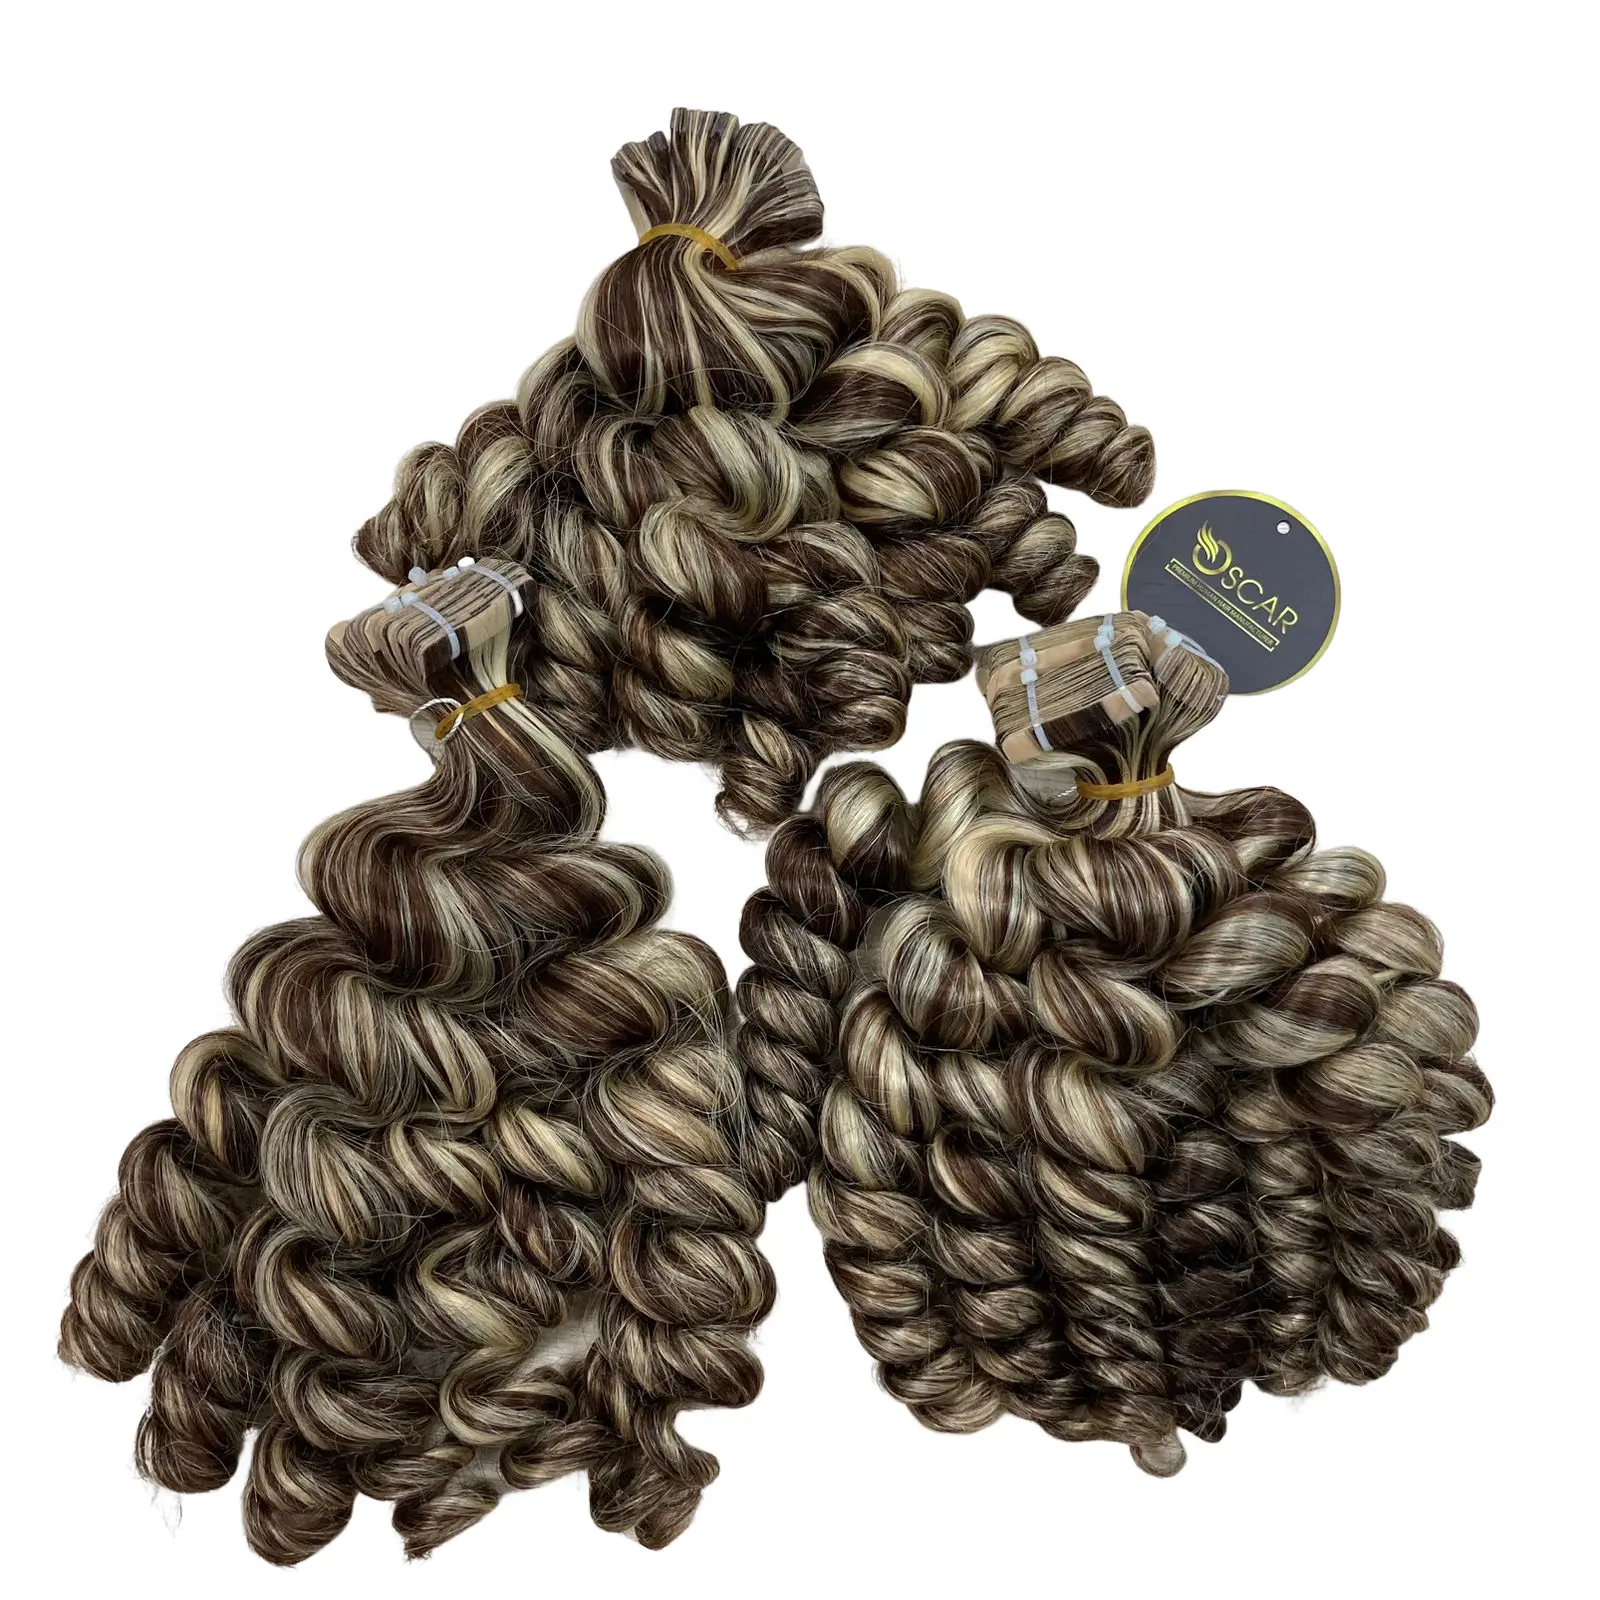 Vietnamese human hair TAPE HAIR - 100% Human Hair Extensions At Competitive Price For Sale